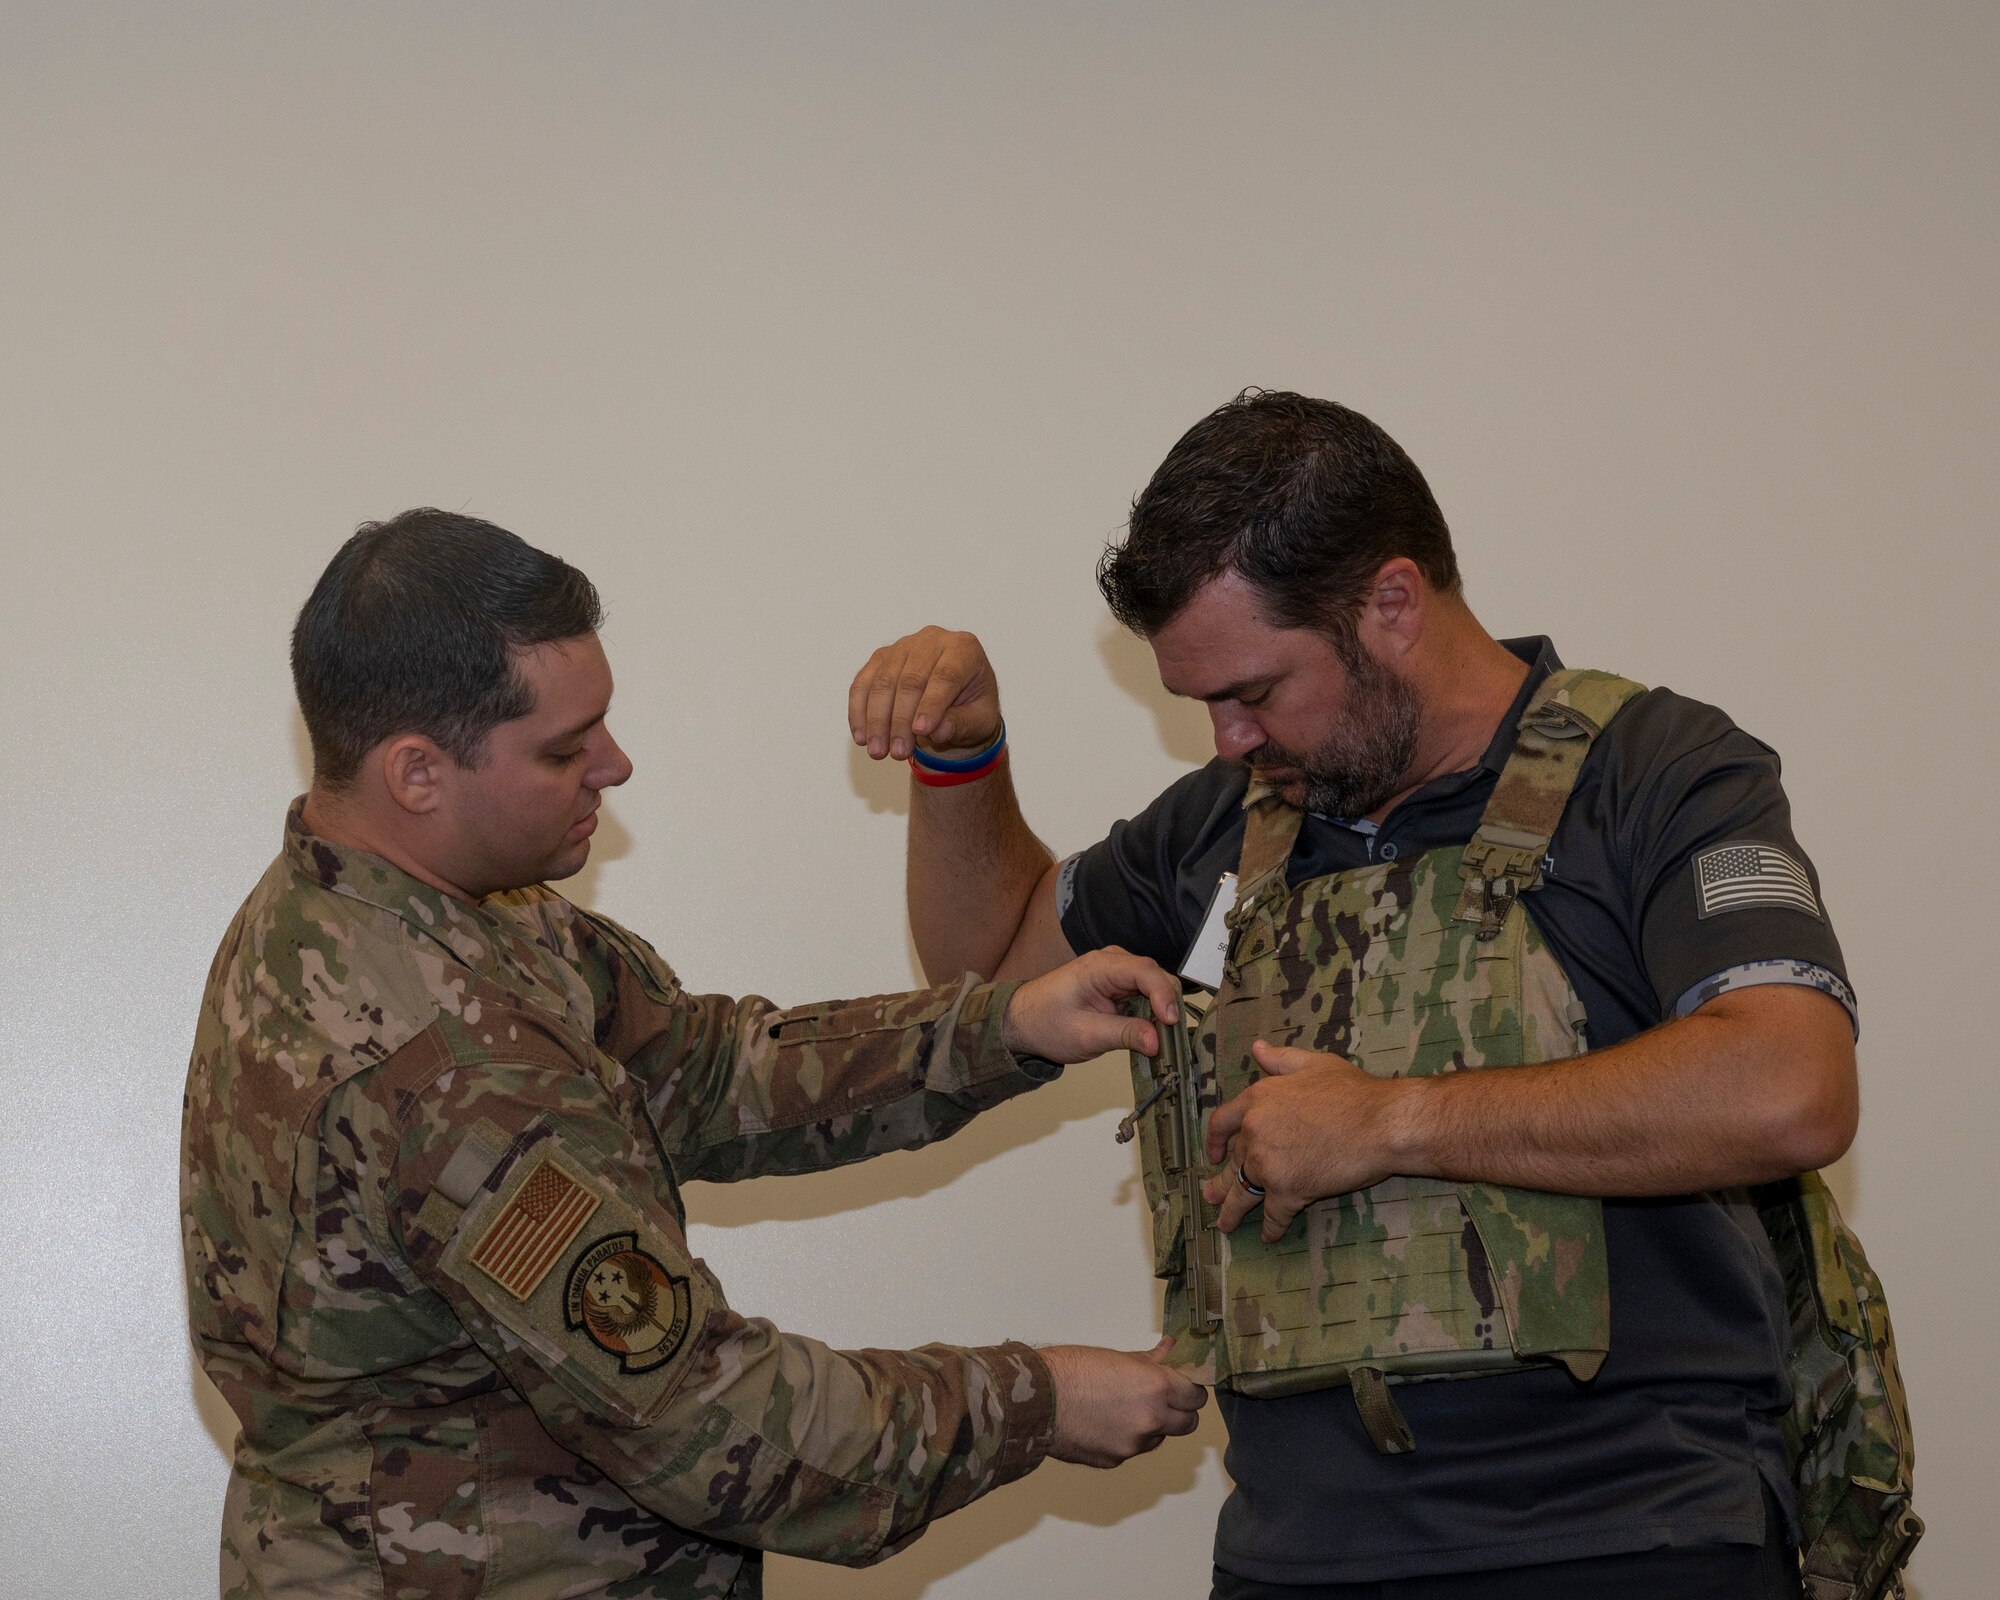 A picture of a man helping another put on a vest